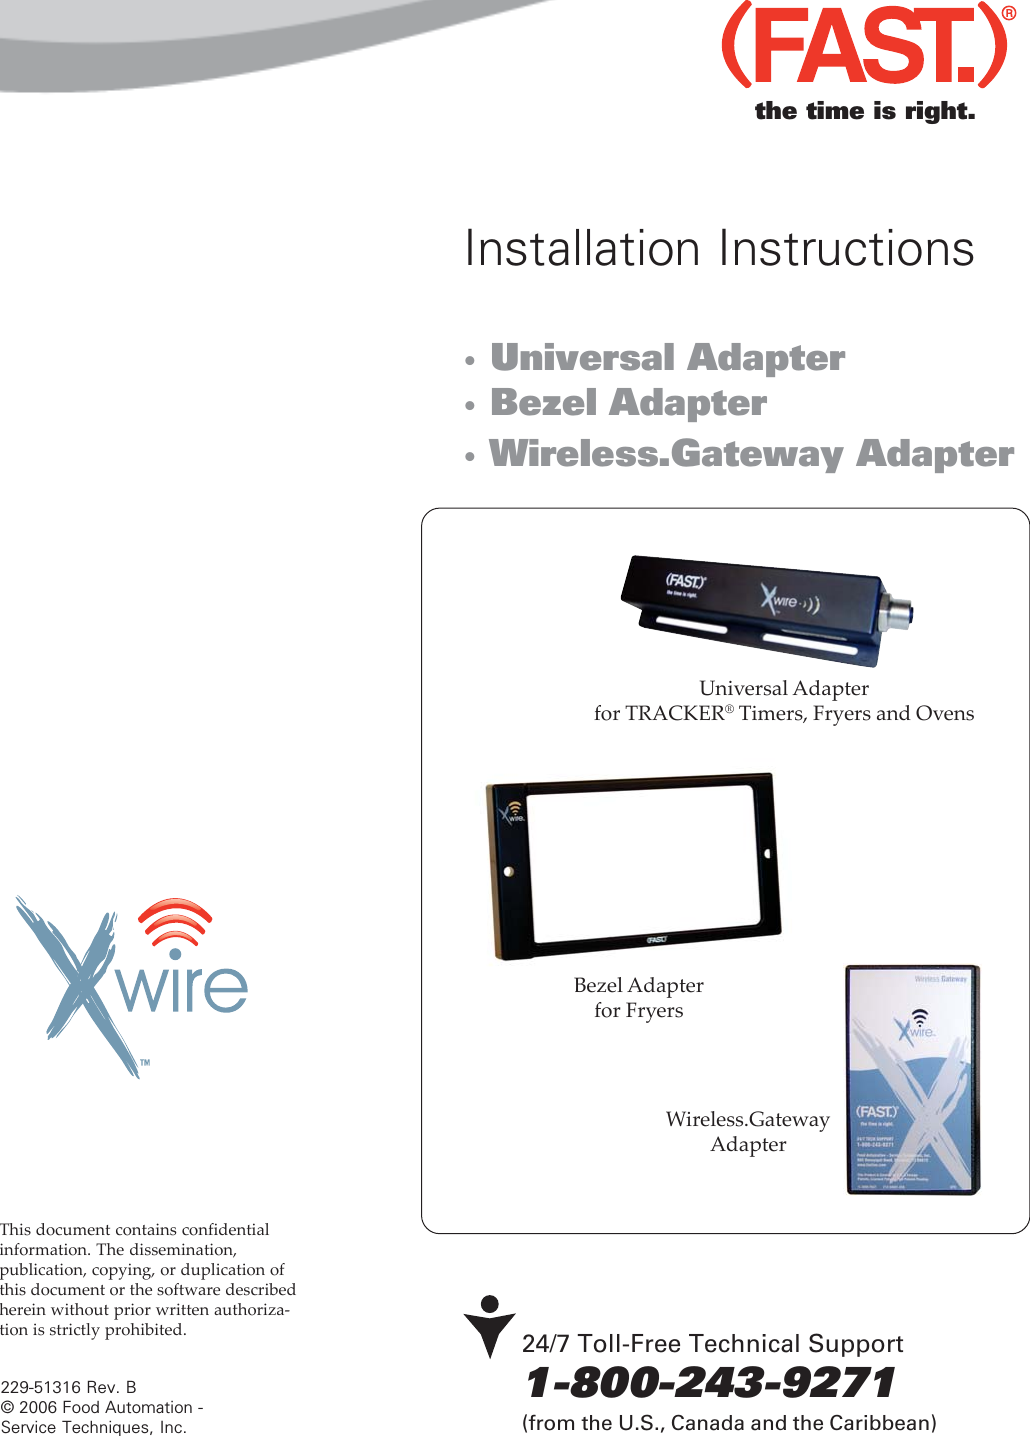 · Universal Adapter· Bezel Adapter· Wireless.Gateway Adapter24/7 Toll-Free Technical Support1-800-243-9271(from the U.S., Canada and the Caribbean)229-51316 Rev. B© 2006 Food Automation -Service Techniques, Inc.Installation InstructionsThis document contains confidentialinformation. The dissemination,publication, copying, or duplication ofthis document or the software describedherein without prior written authoriza-tion is strictly prohibited.$5Universal Adapterfor TRACKER® Timers, Fryers and OvensBezel Adapterfor Fryersthe time is right.Wireless.GatewayAdapter